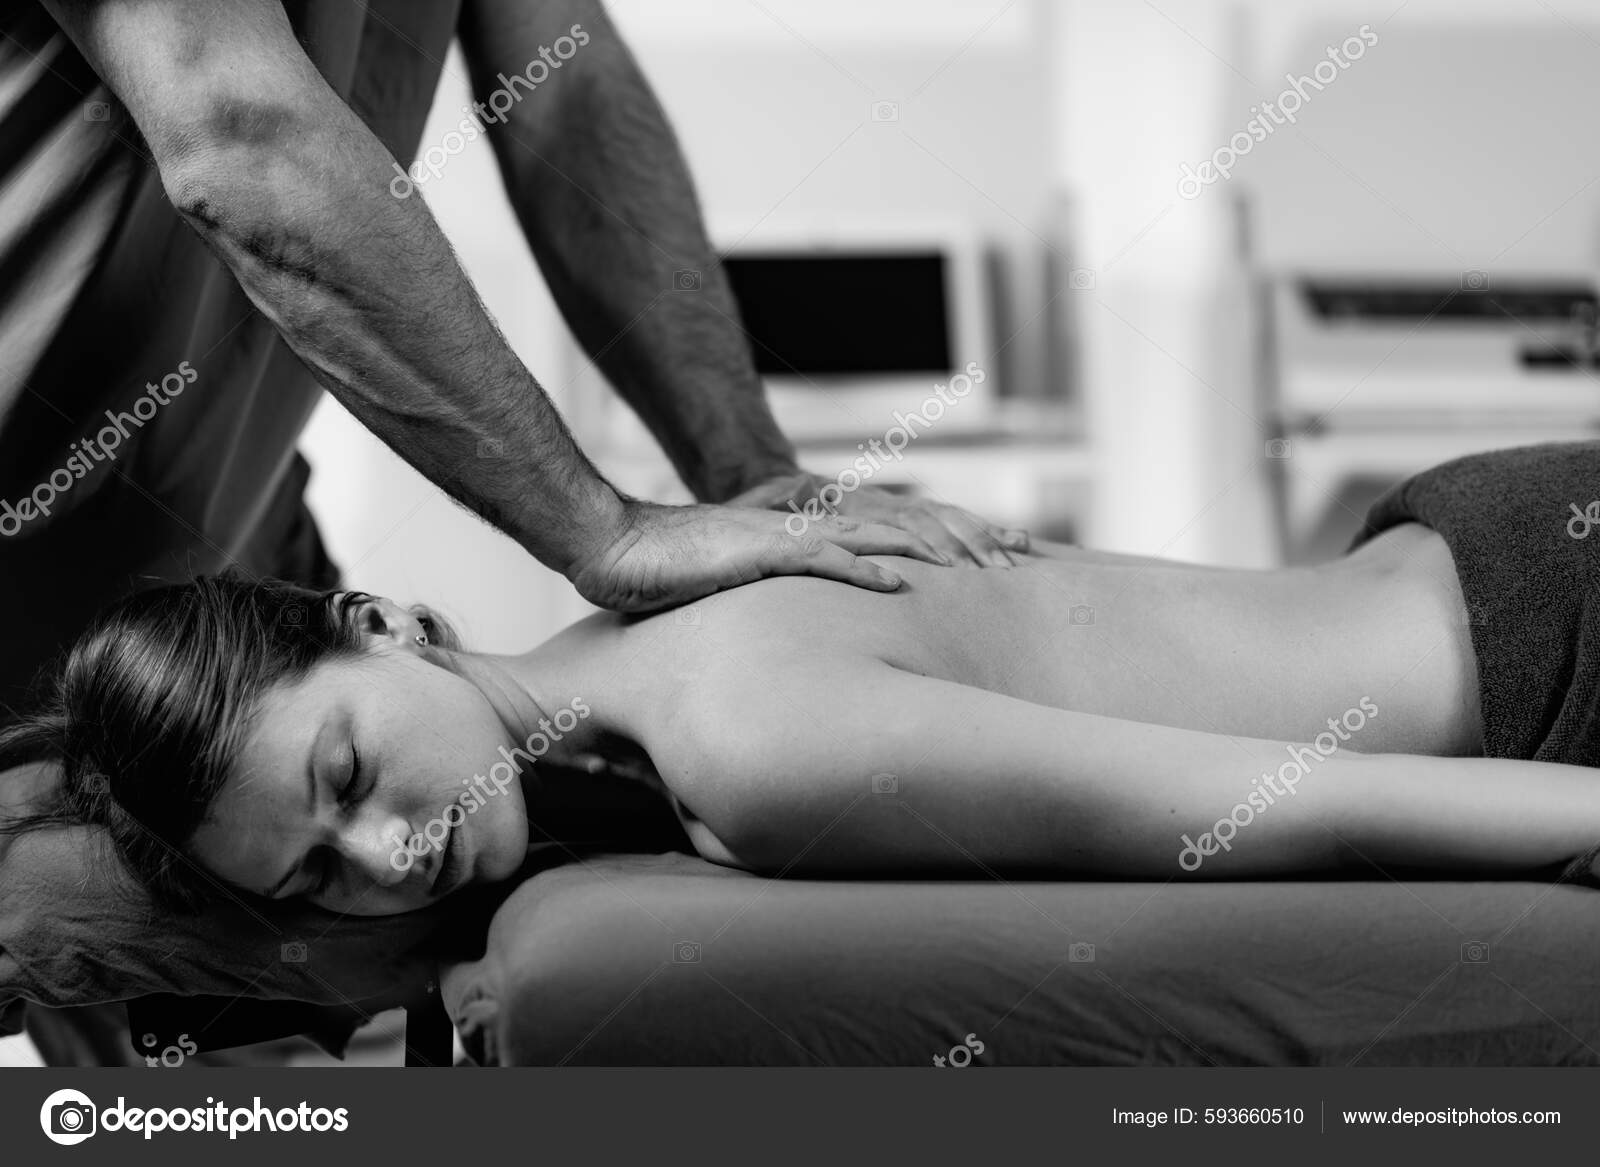 Relax Lower Back Massage Stock Photo by microgen